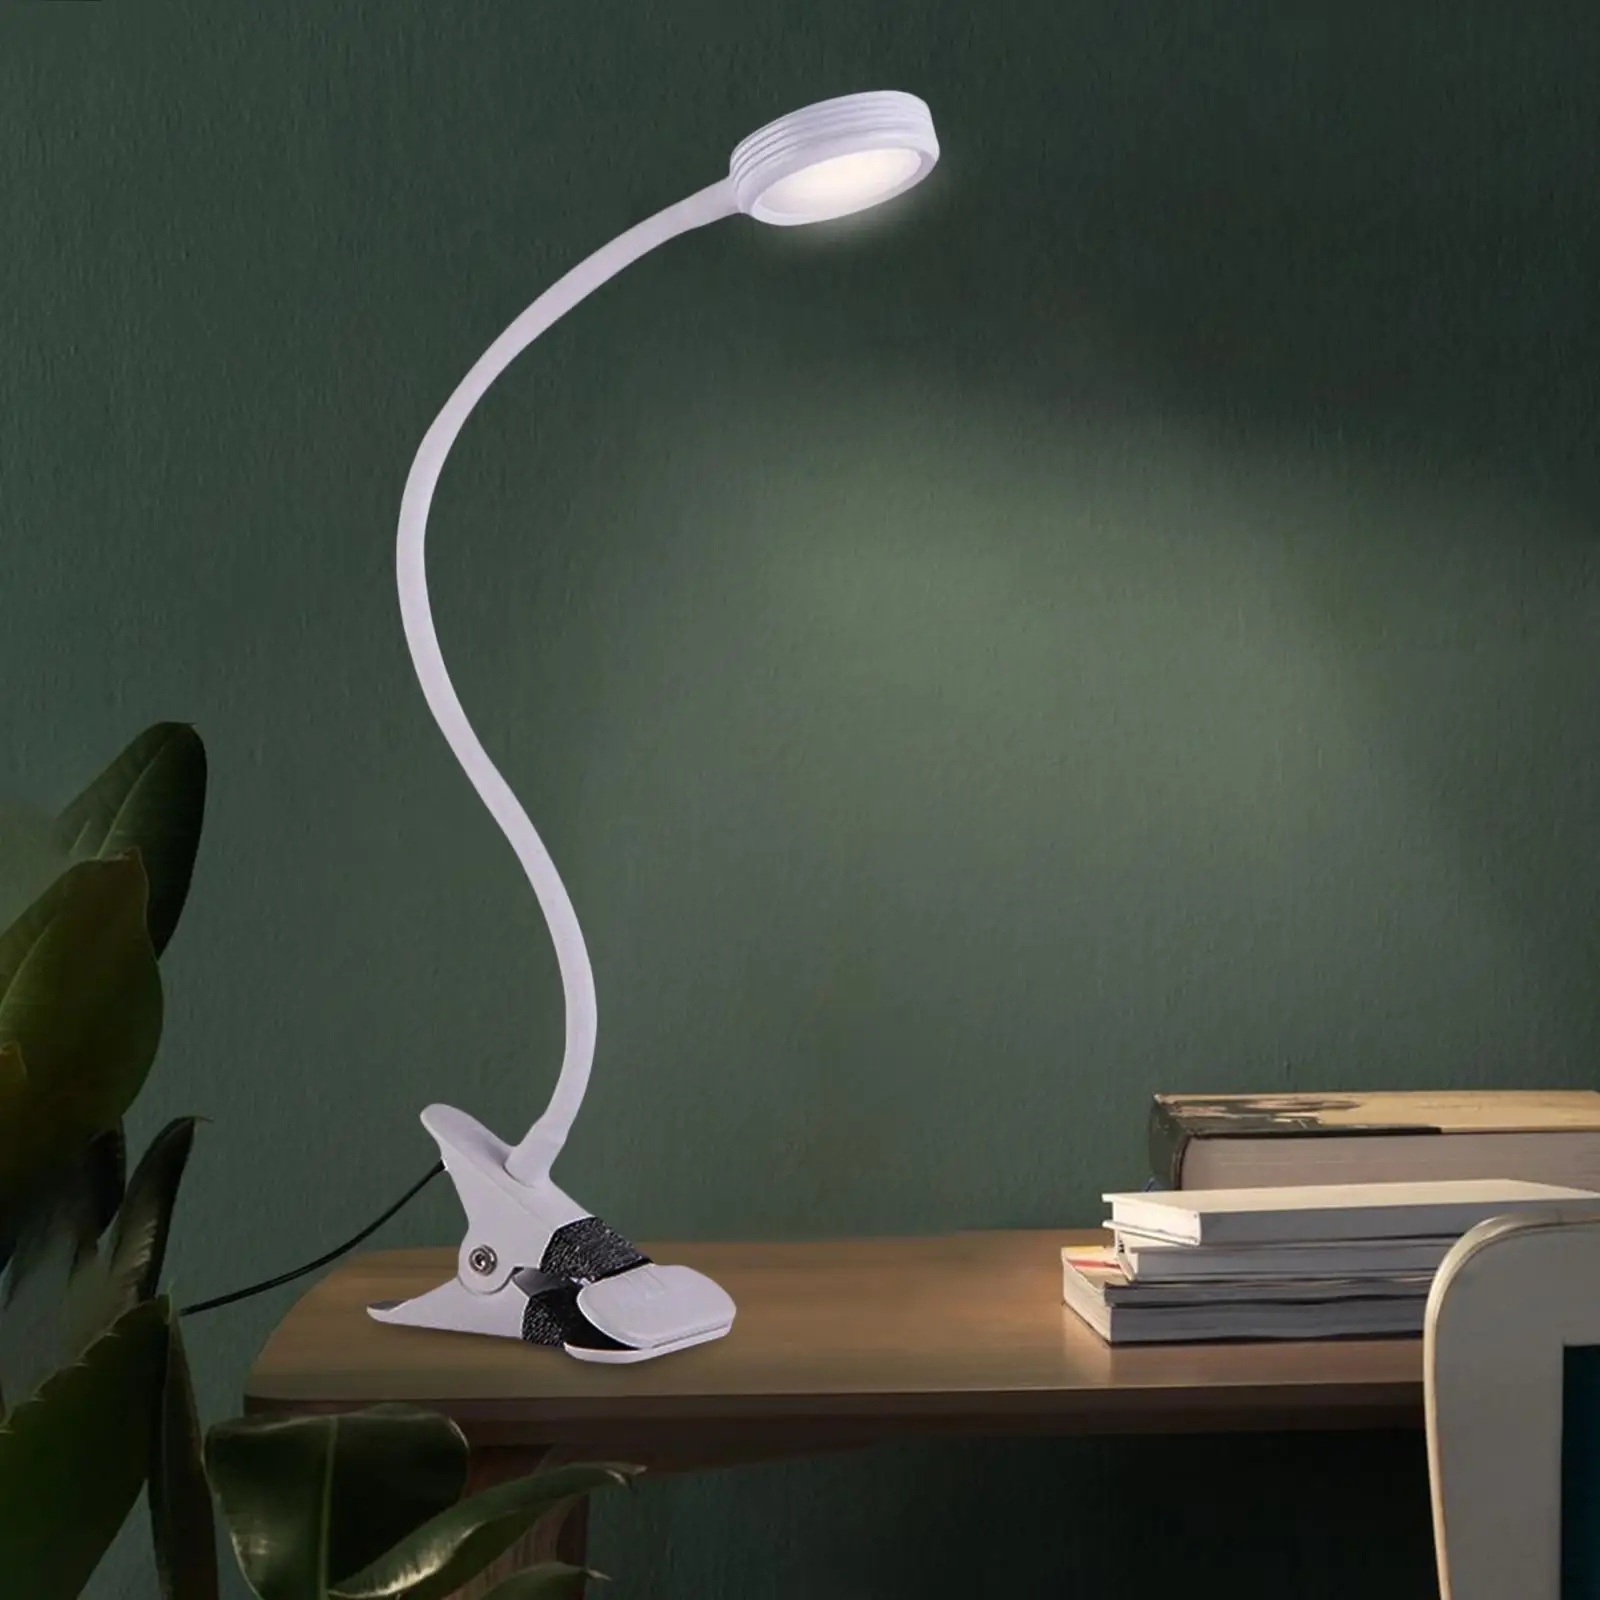 Flexible LED Desk Lamp with Clamp Adjustable USB Table Lamp for Reading in Bed Headboard